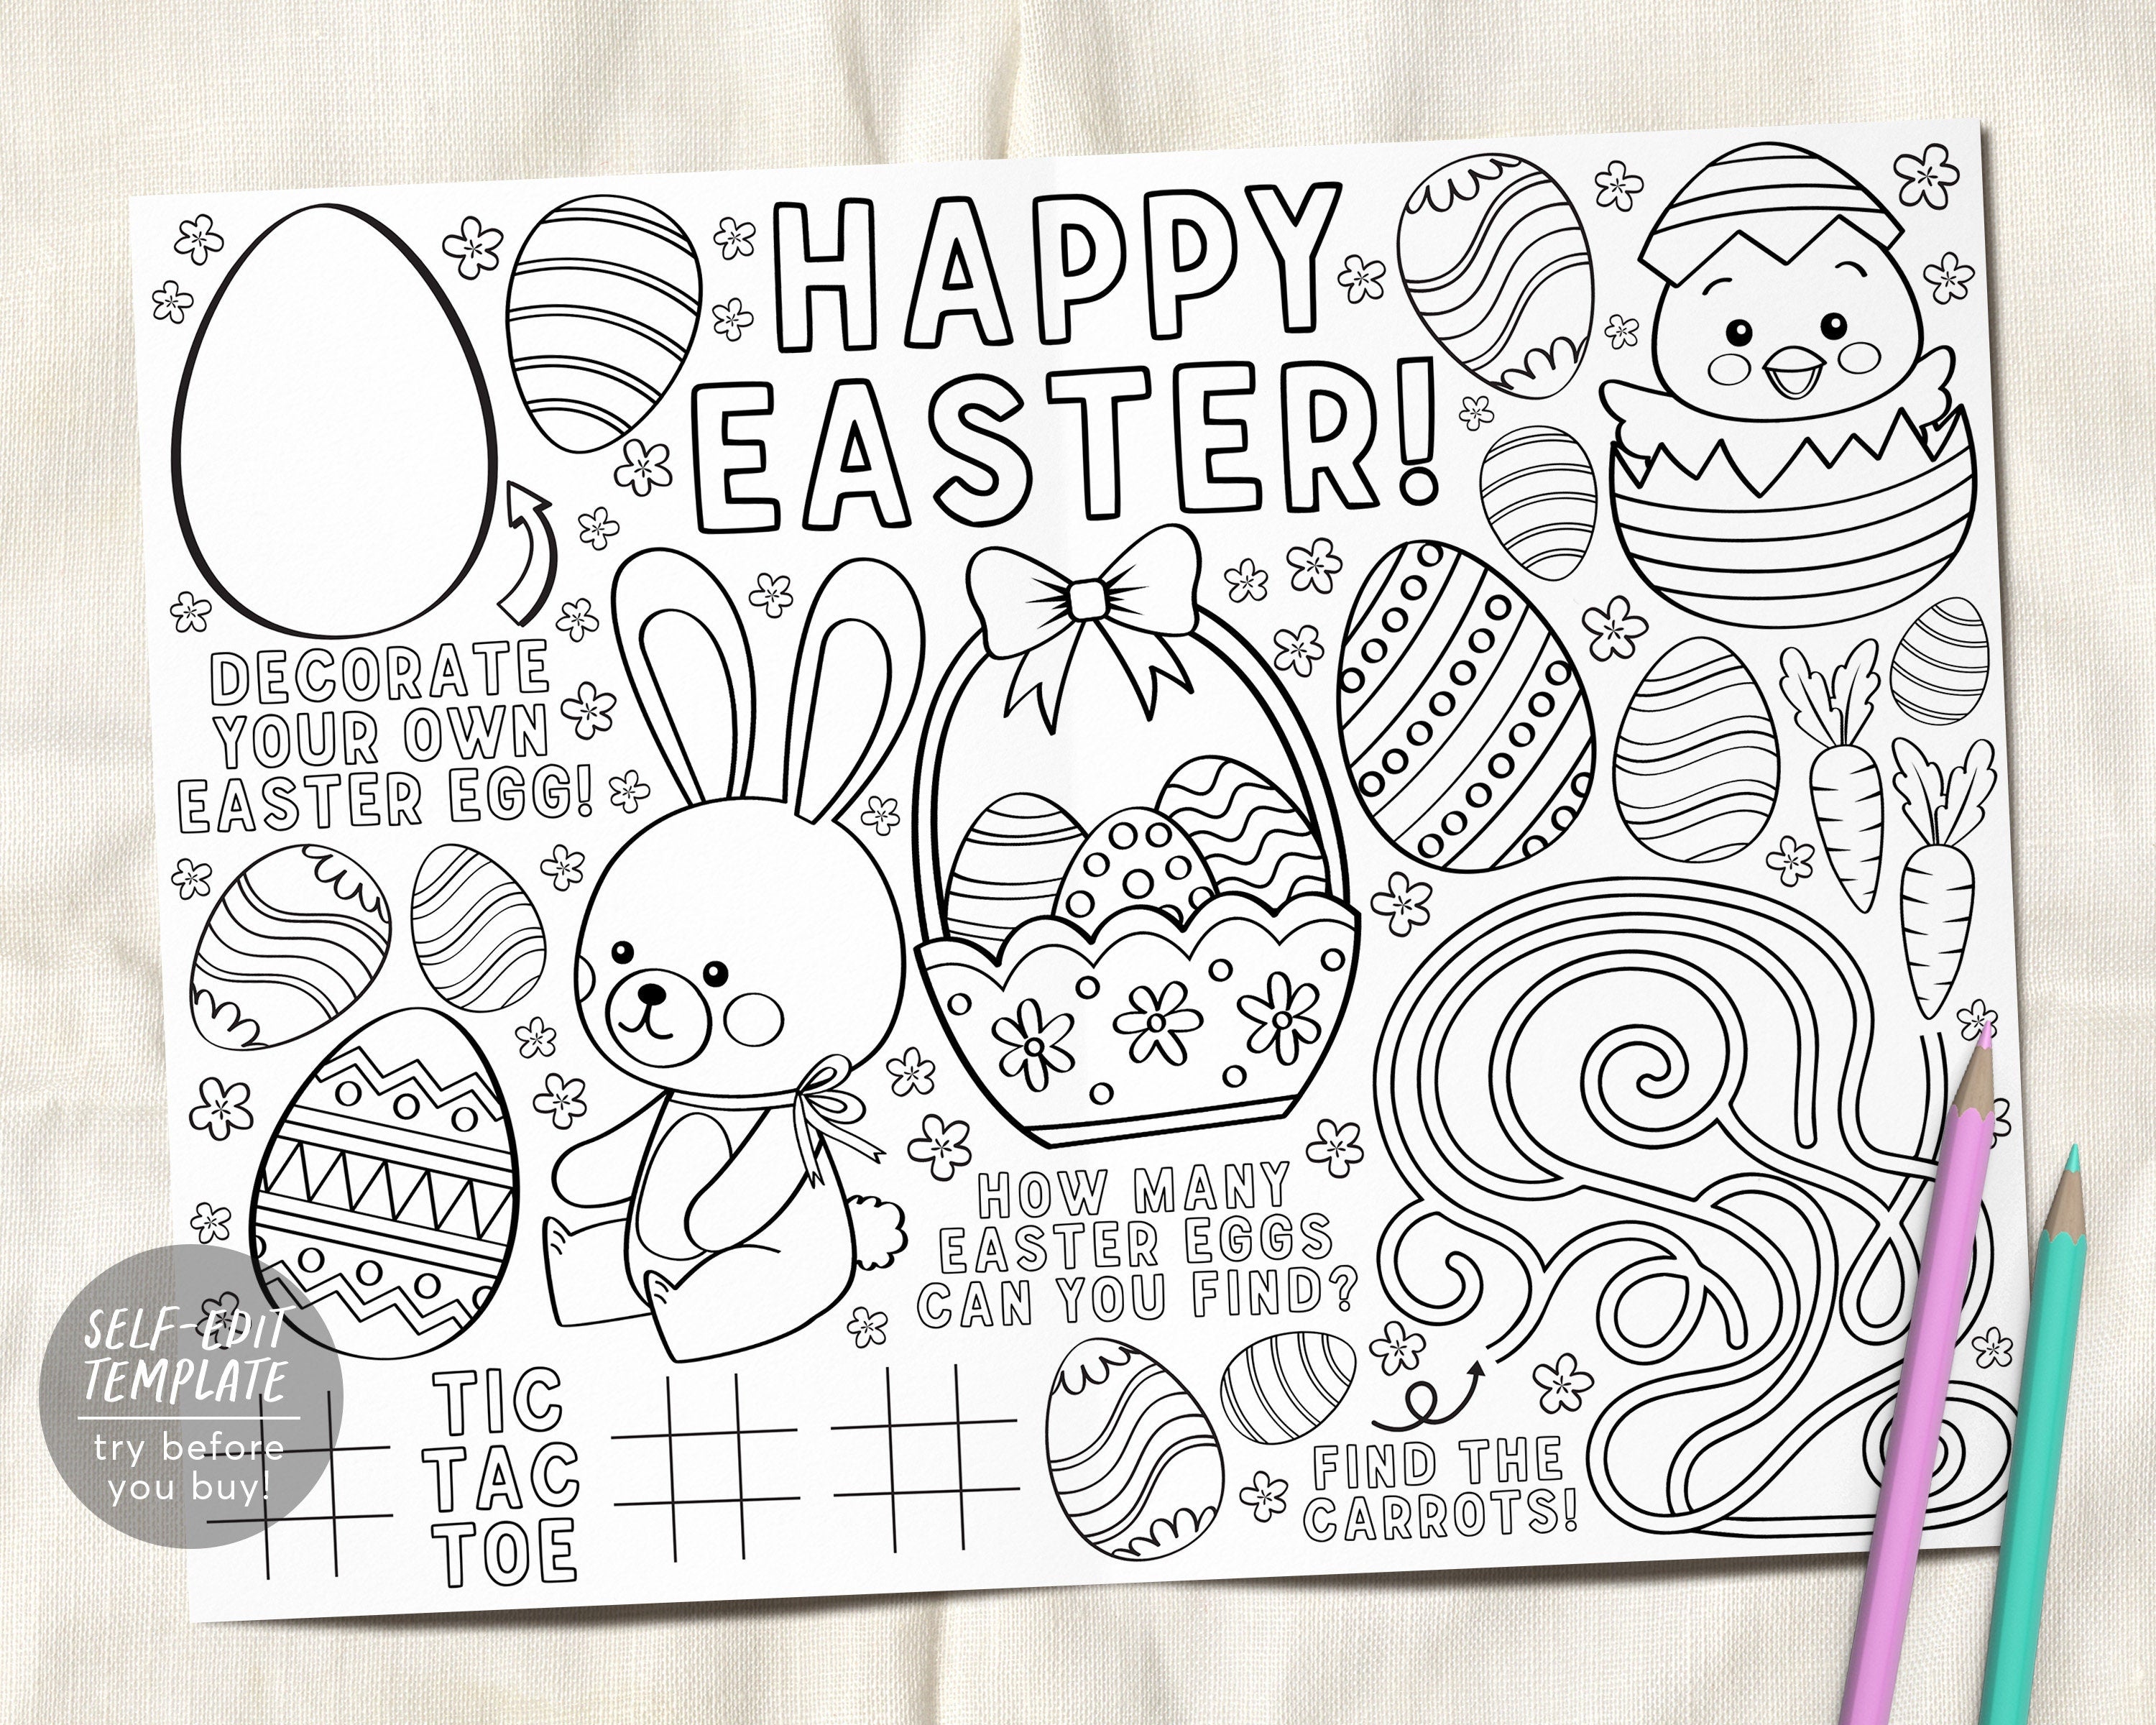 Personalized Coloring Placemat Pages Girls Set – Art Appeel